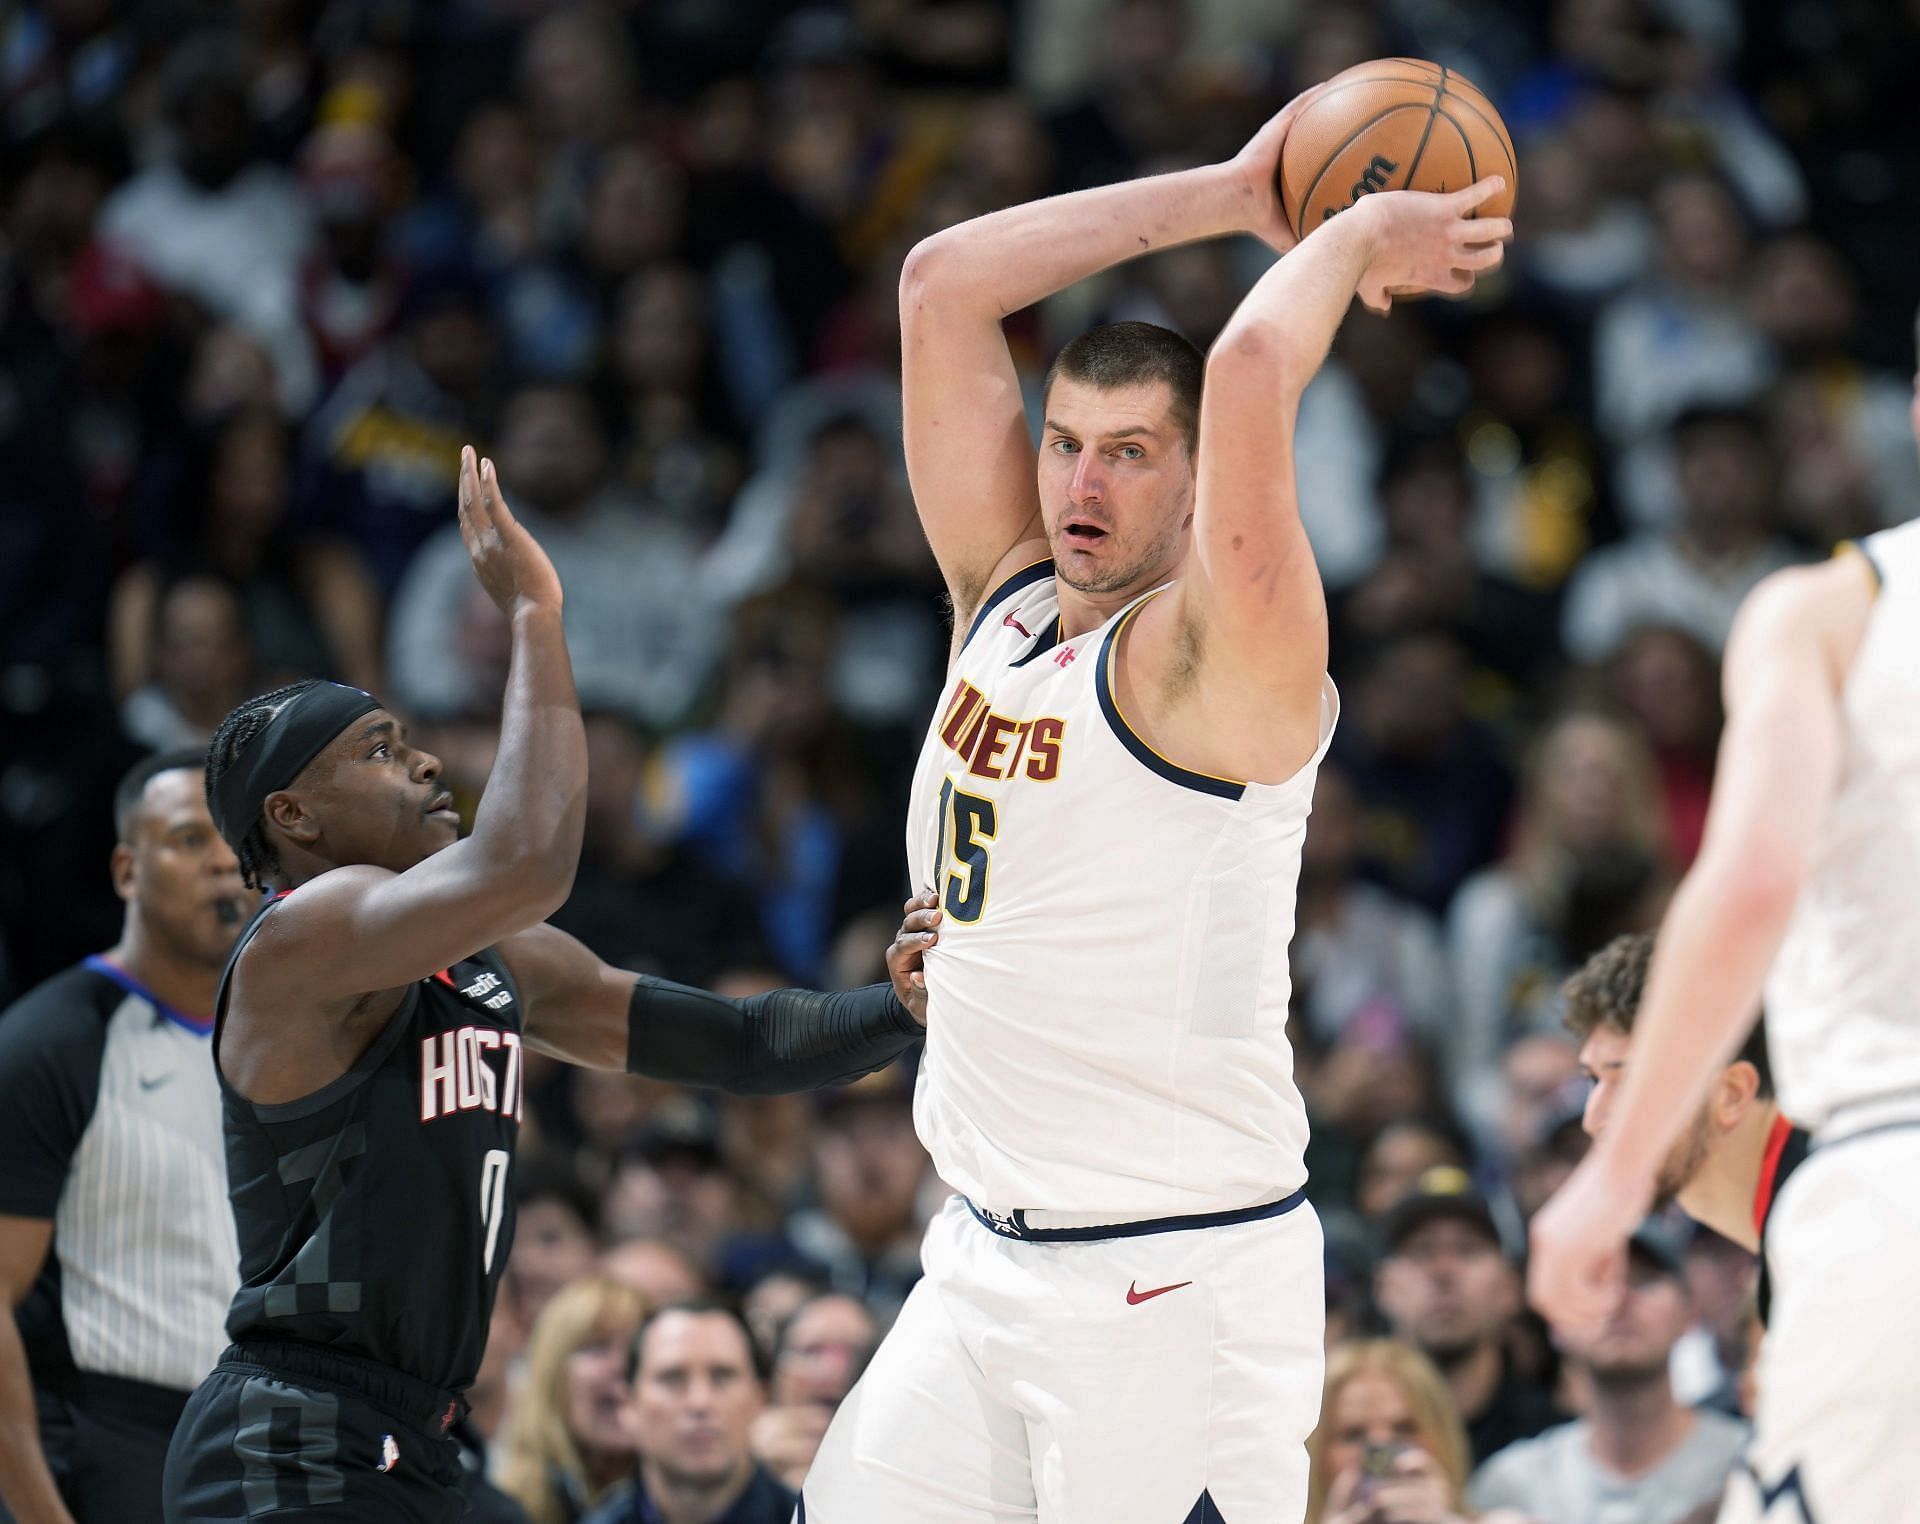 Nikola Jokic in action for the Nuggets